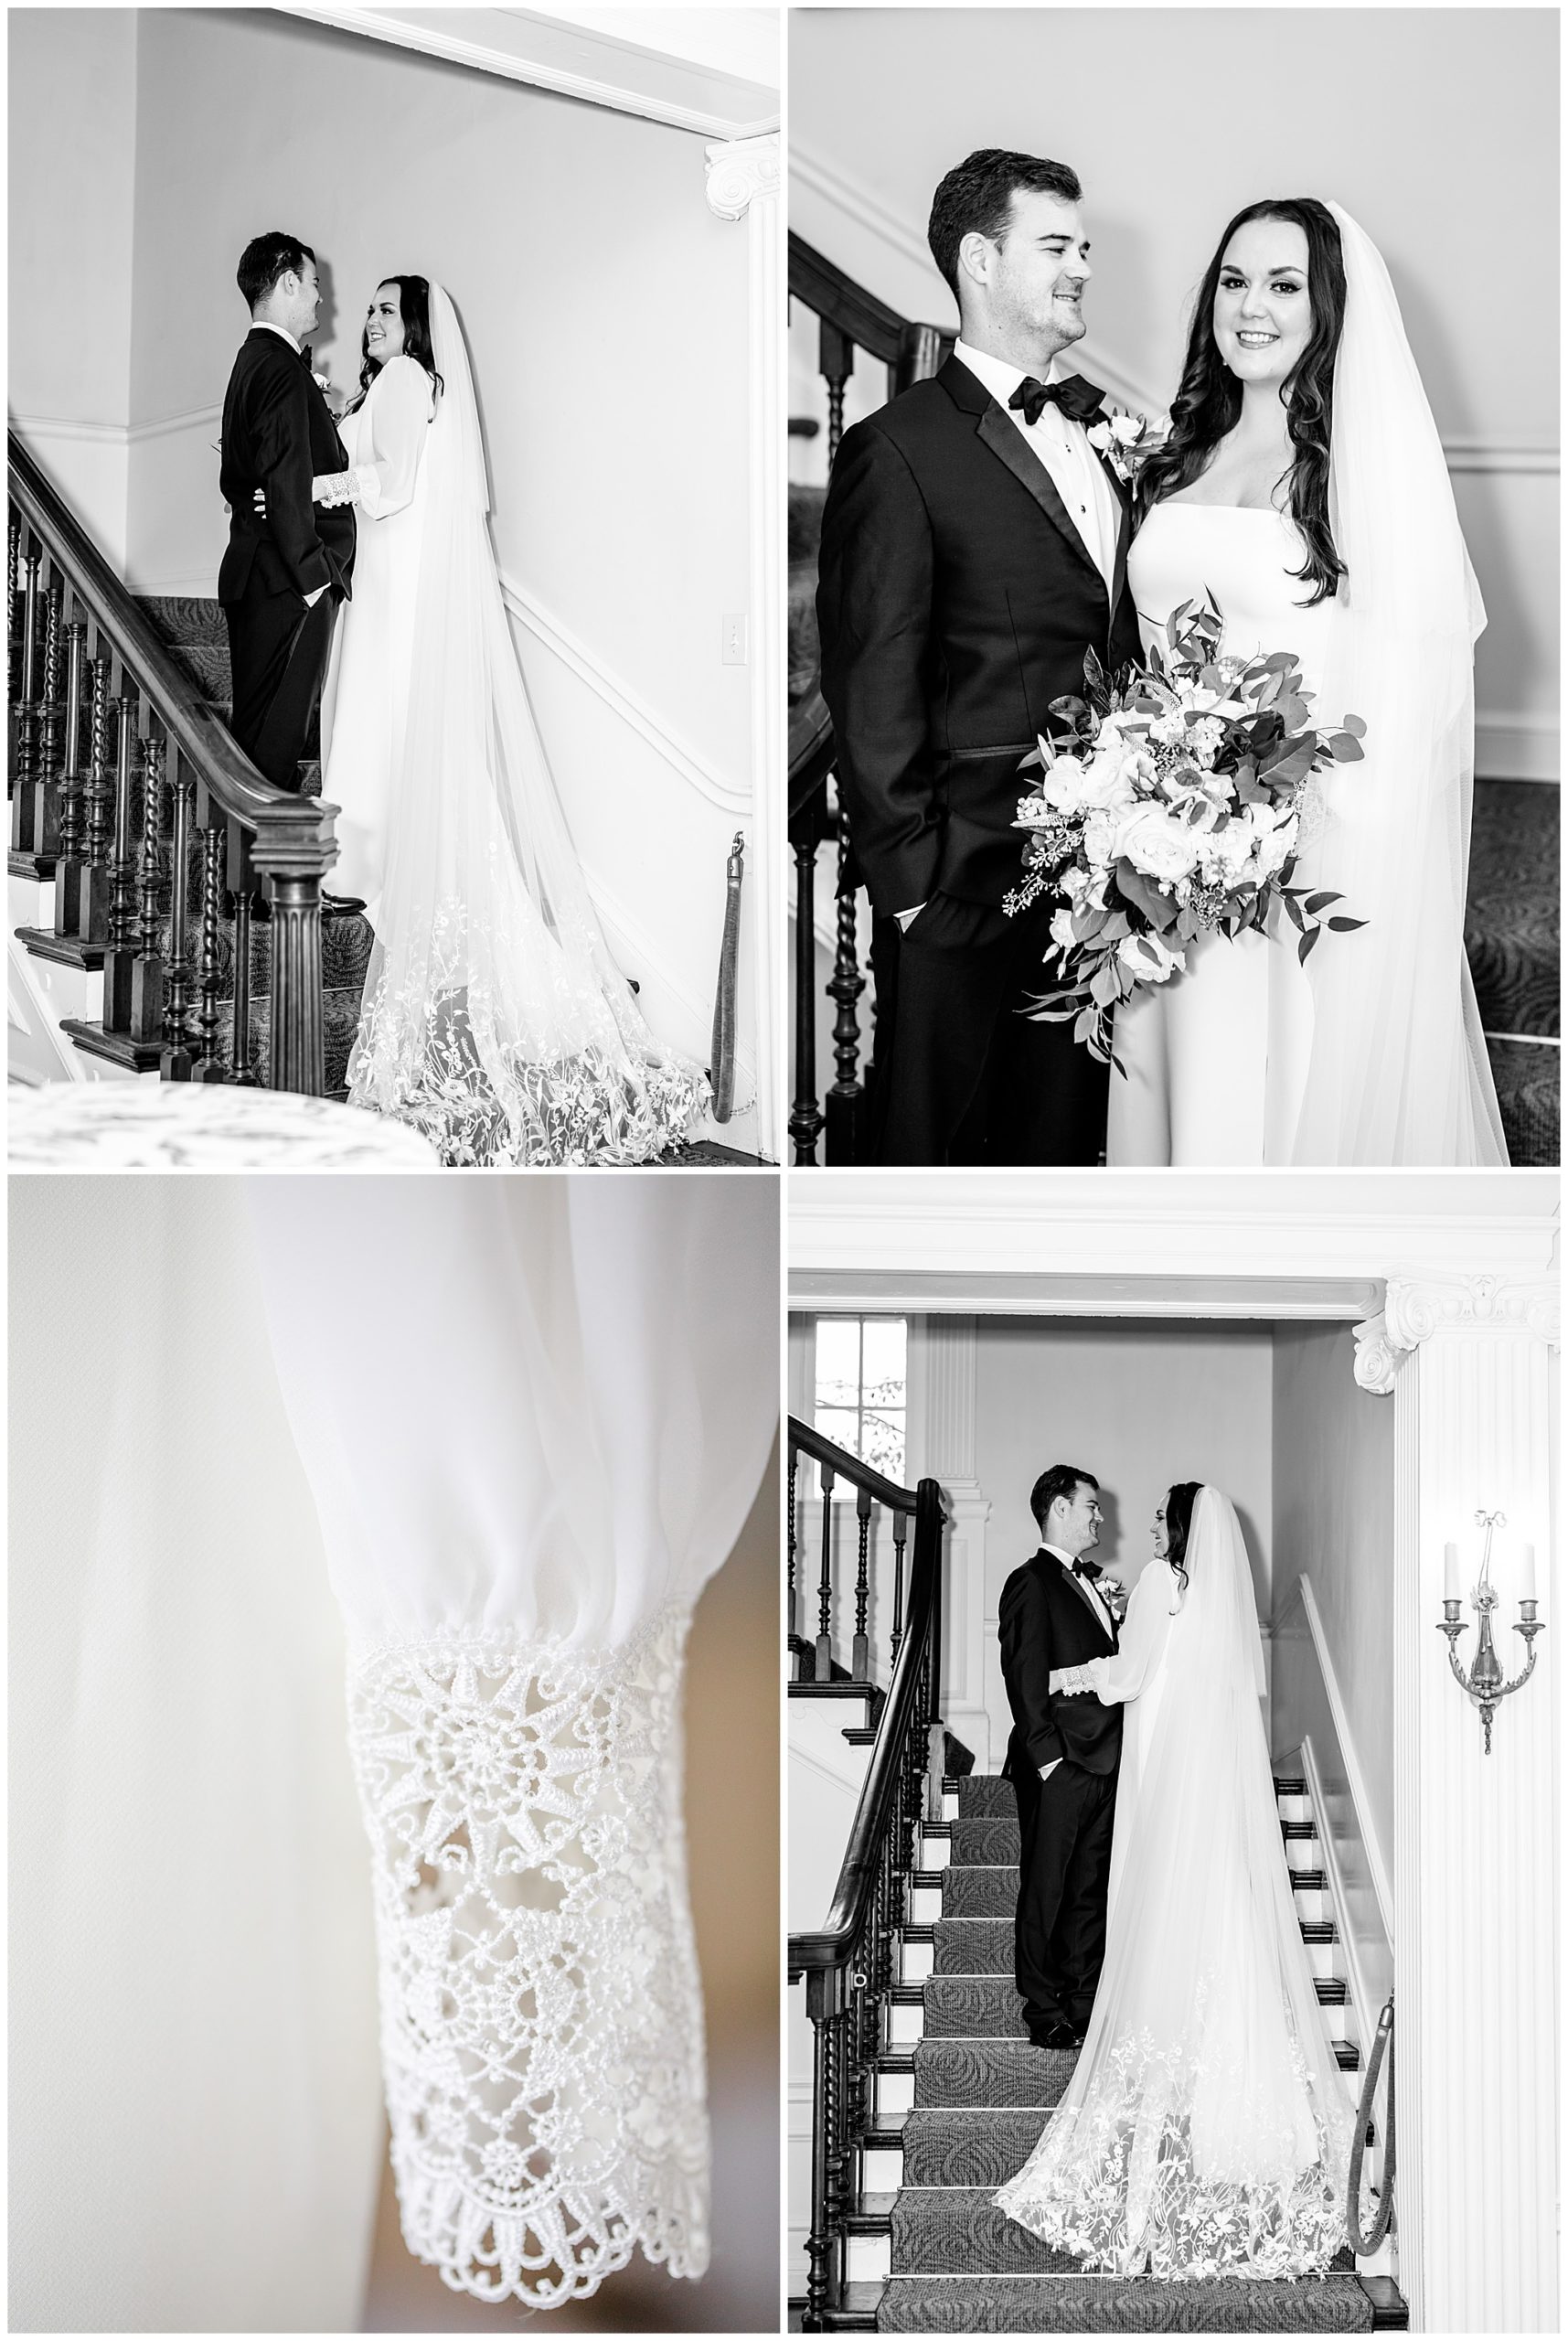 emerald and ivory Woodend Sanctuary wedding, autumn Woodend Sanctuary wedding, rainy day wedding, Maryland wedding venues, Chevy Chase MD wedding venue, mansion wedding, manor house wedding, indoor wedding, DC wedding venue, DC wedding photographer, Baltimore wedding photographer, Rachel E.H. Photography, emerald and ivory aesthetic, black and white, bride and groom on stairs, wedding dress lace sleeve